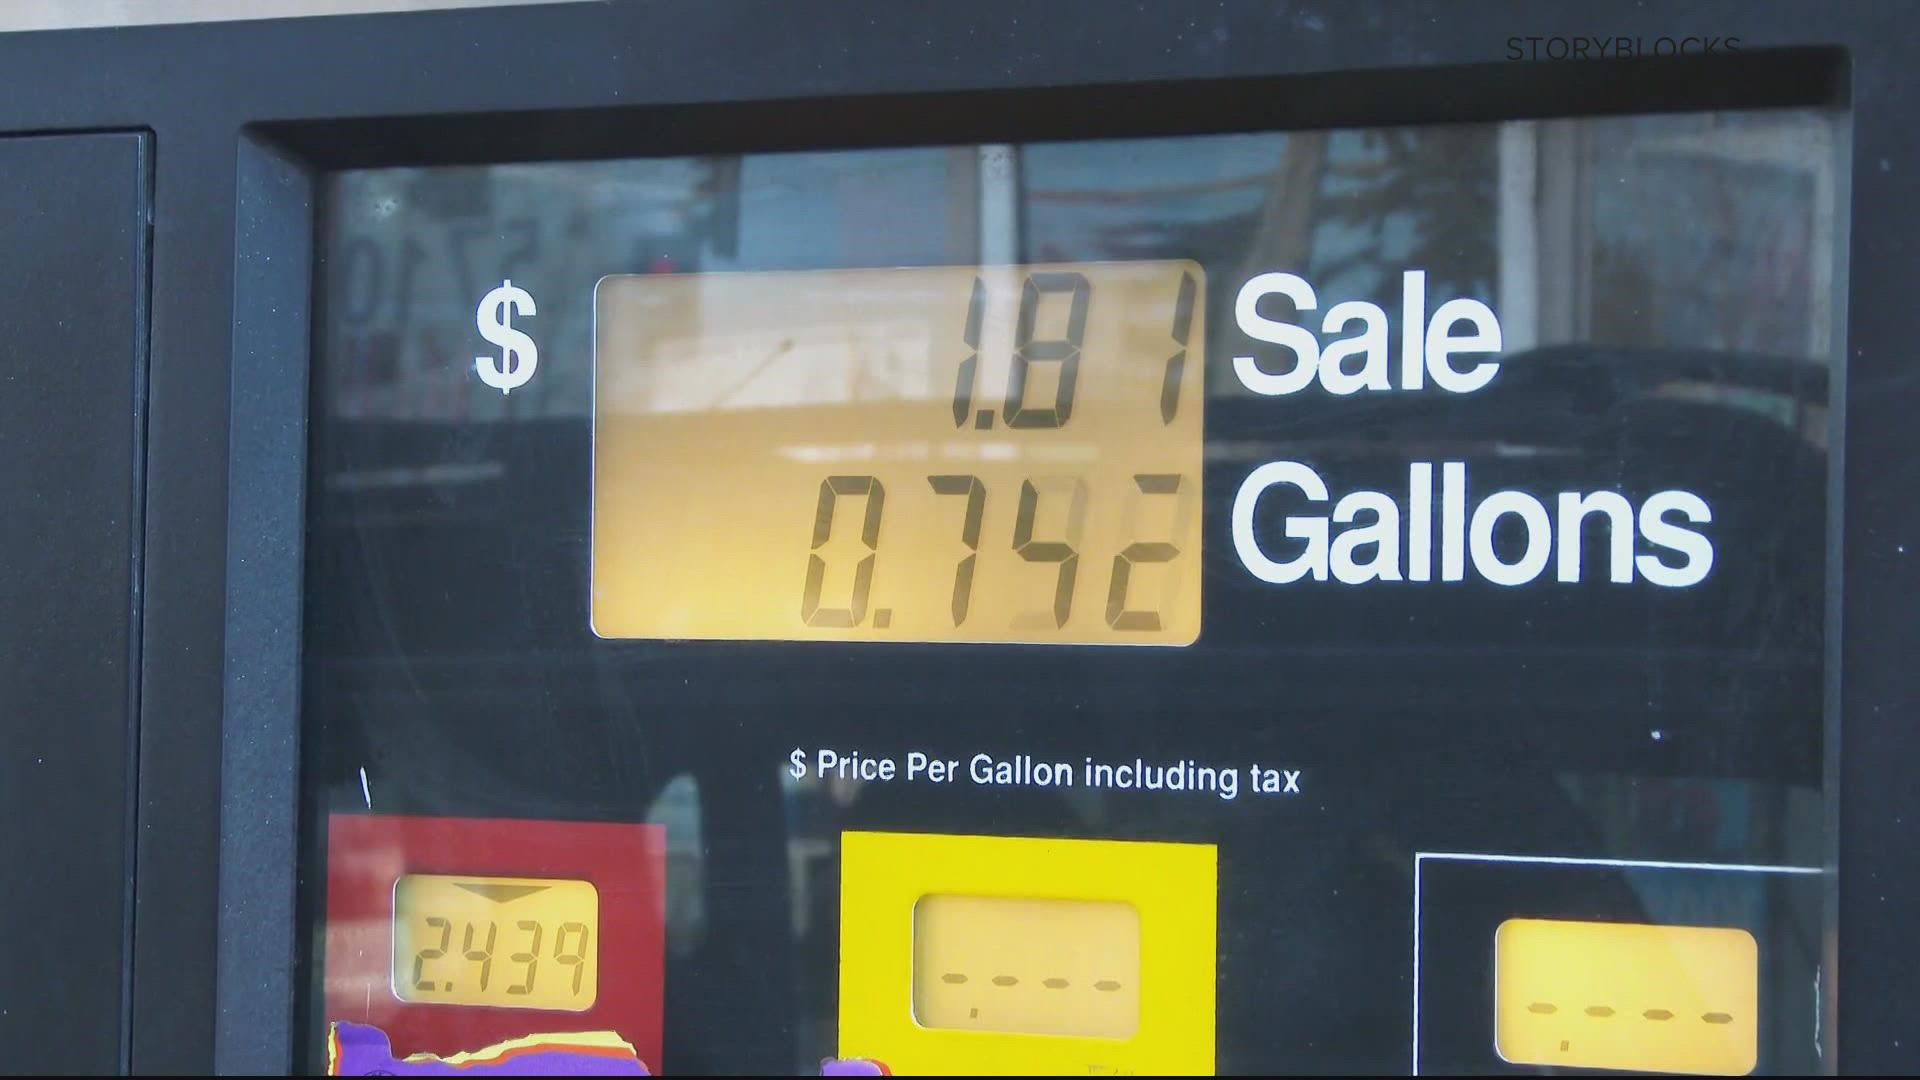 Experts say using a lower-grade gas is not worth the savings in the long term.